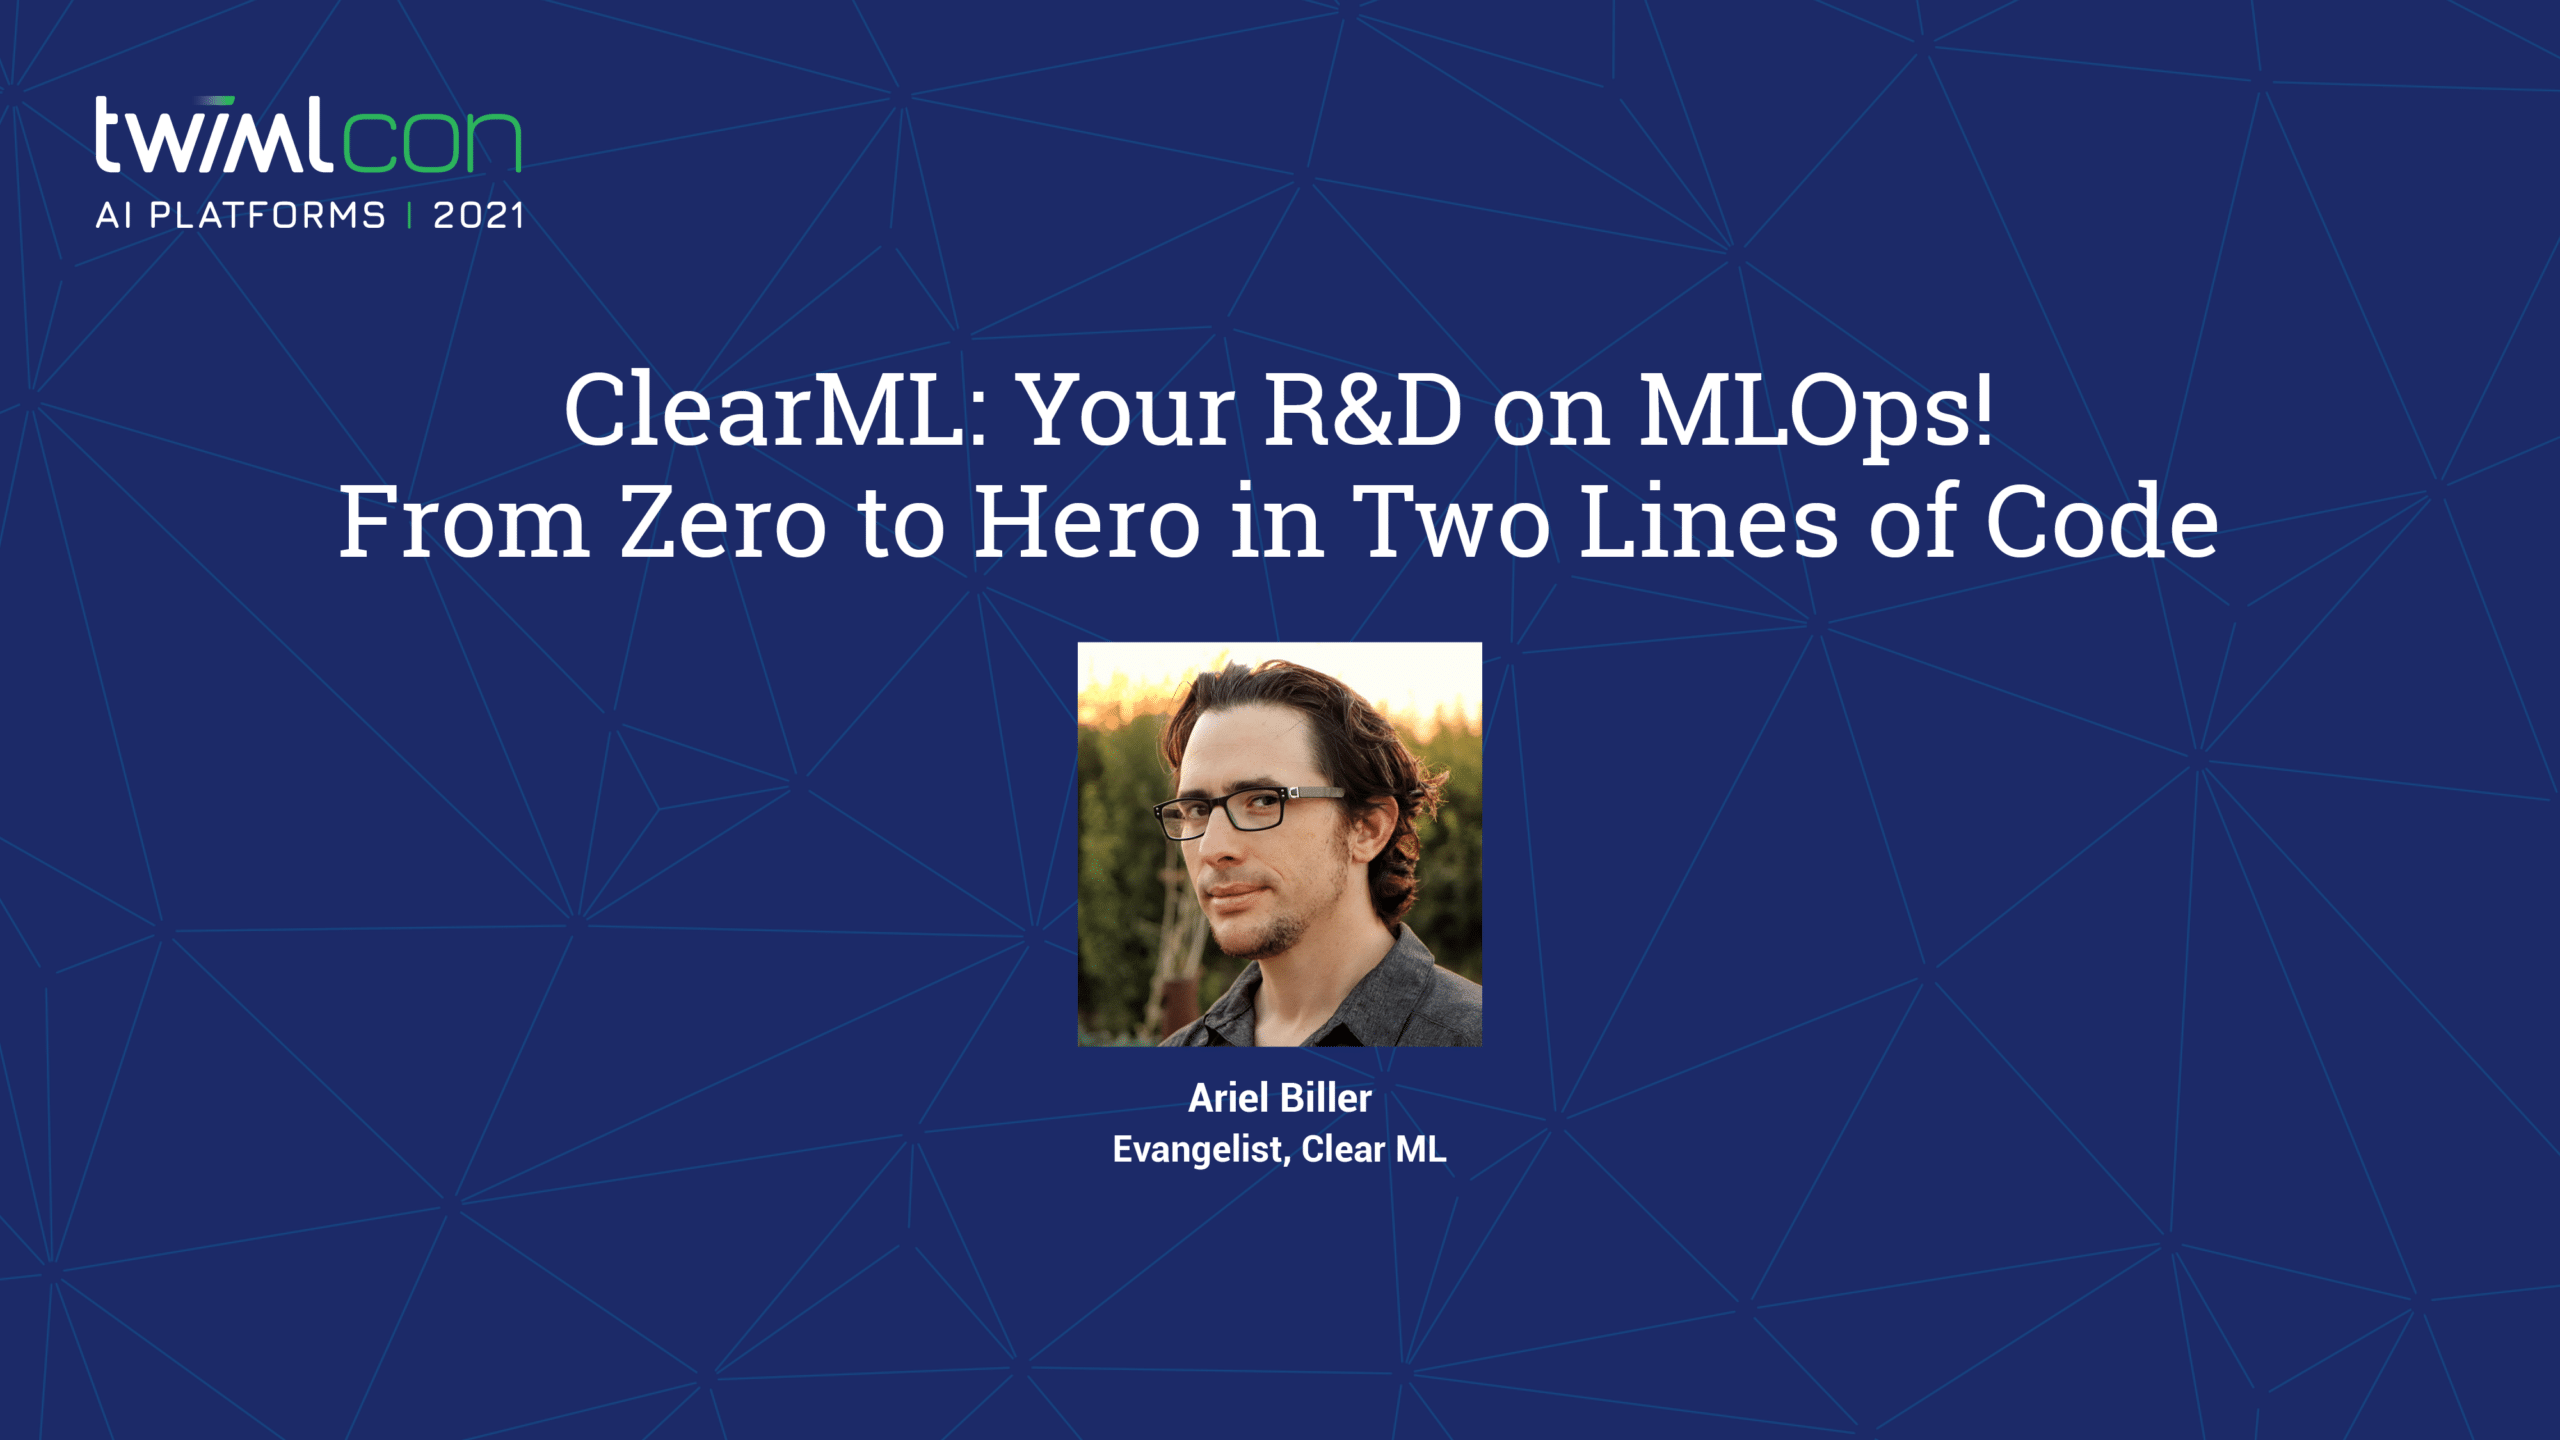 Cover Image: ClearML: Your R&D on MLOps! From zero to hero in two lines of code